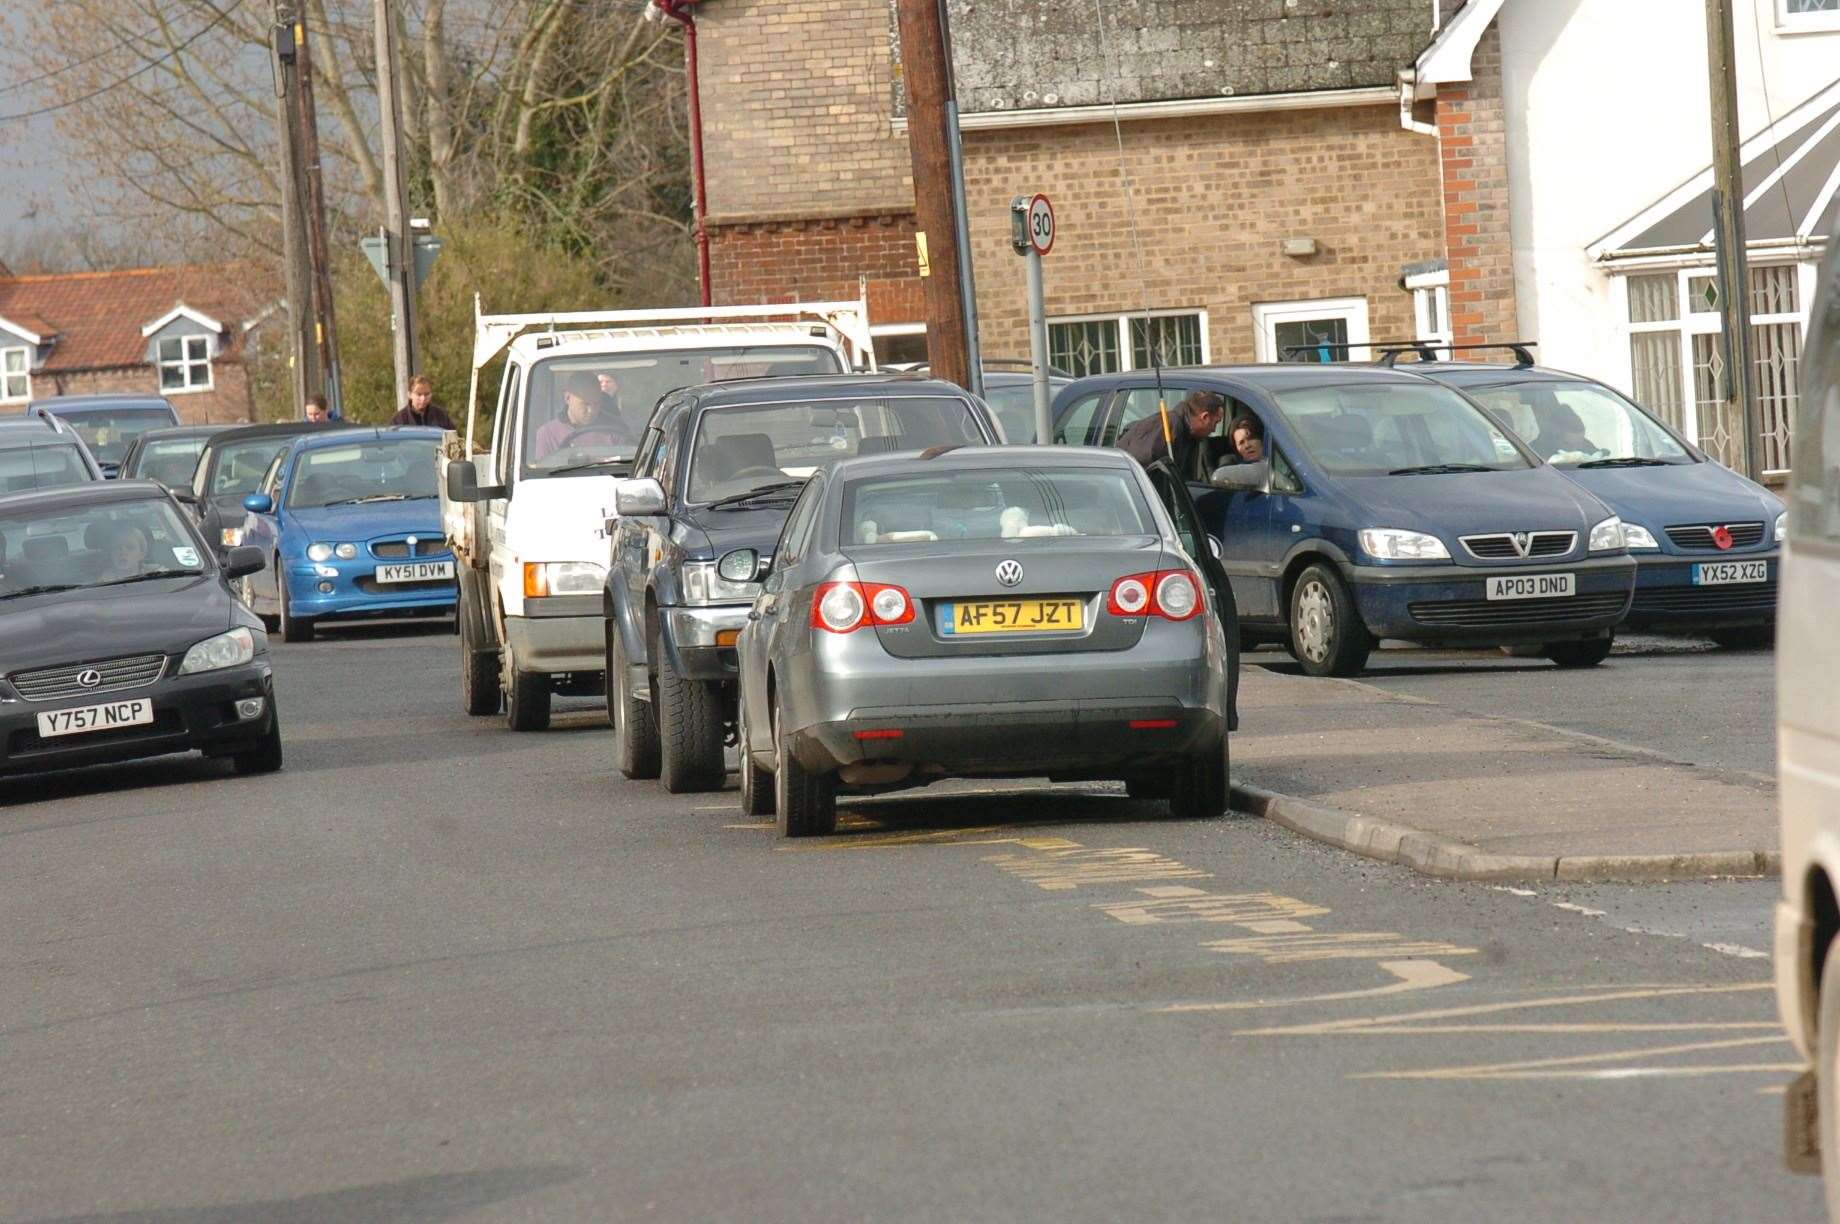 Parents parking outside a school and pre-school on zig zag lines. (stock pictures)